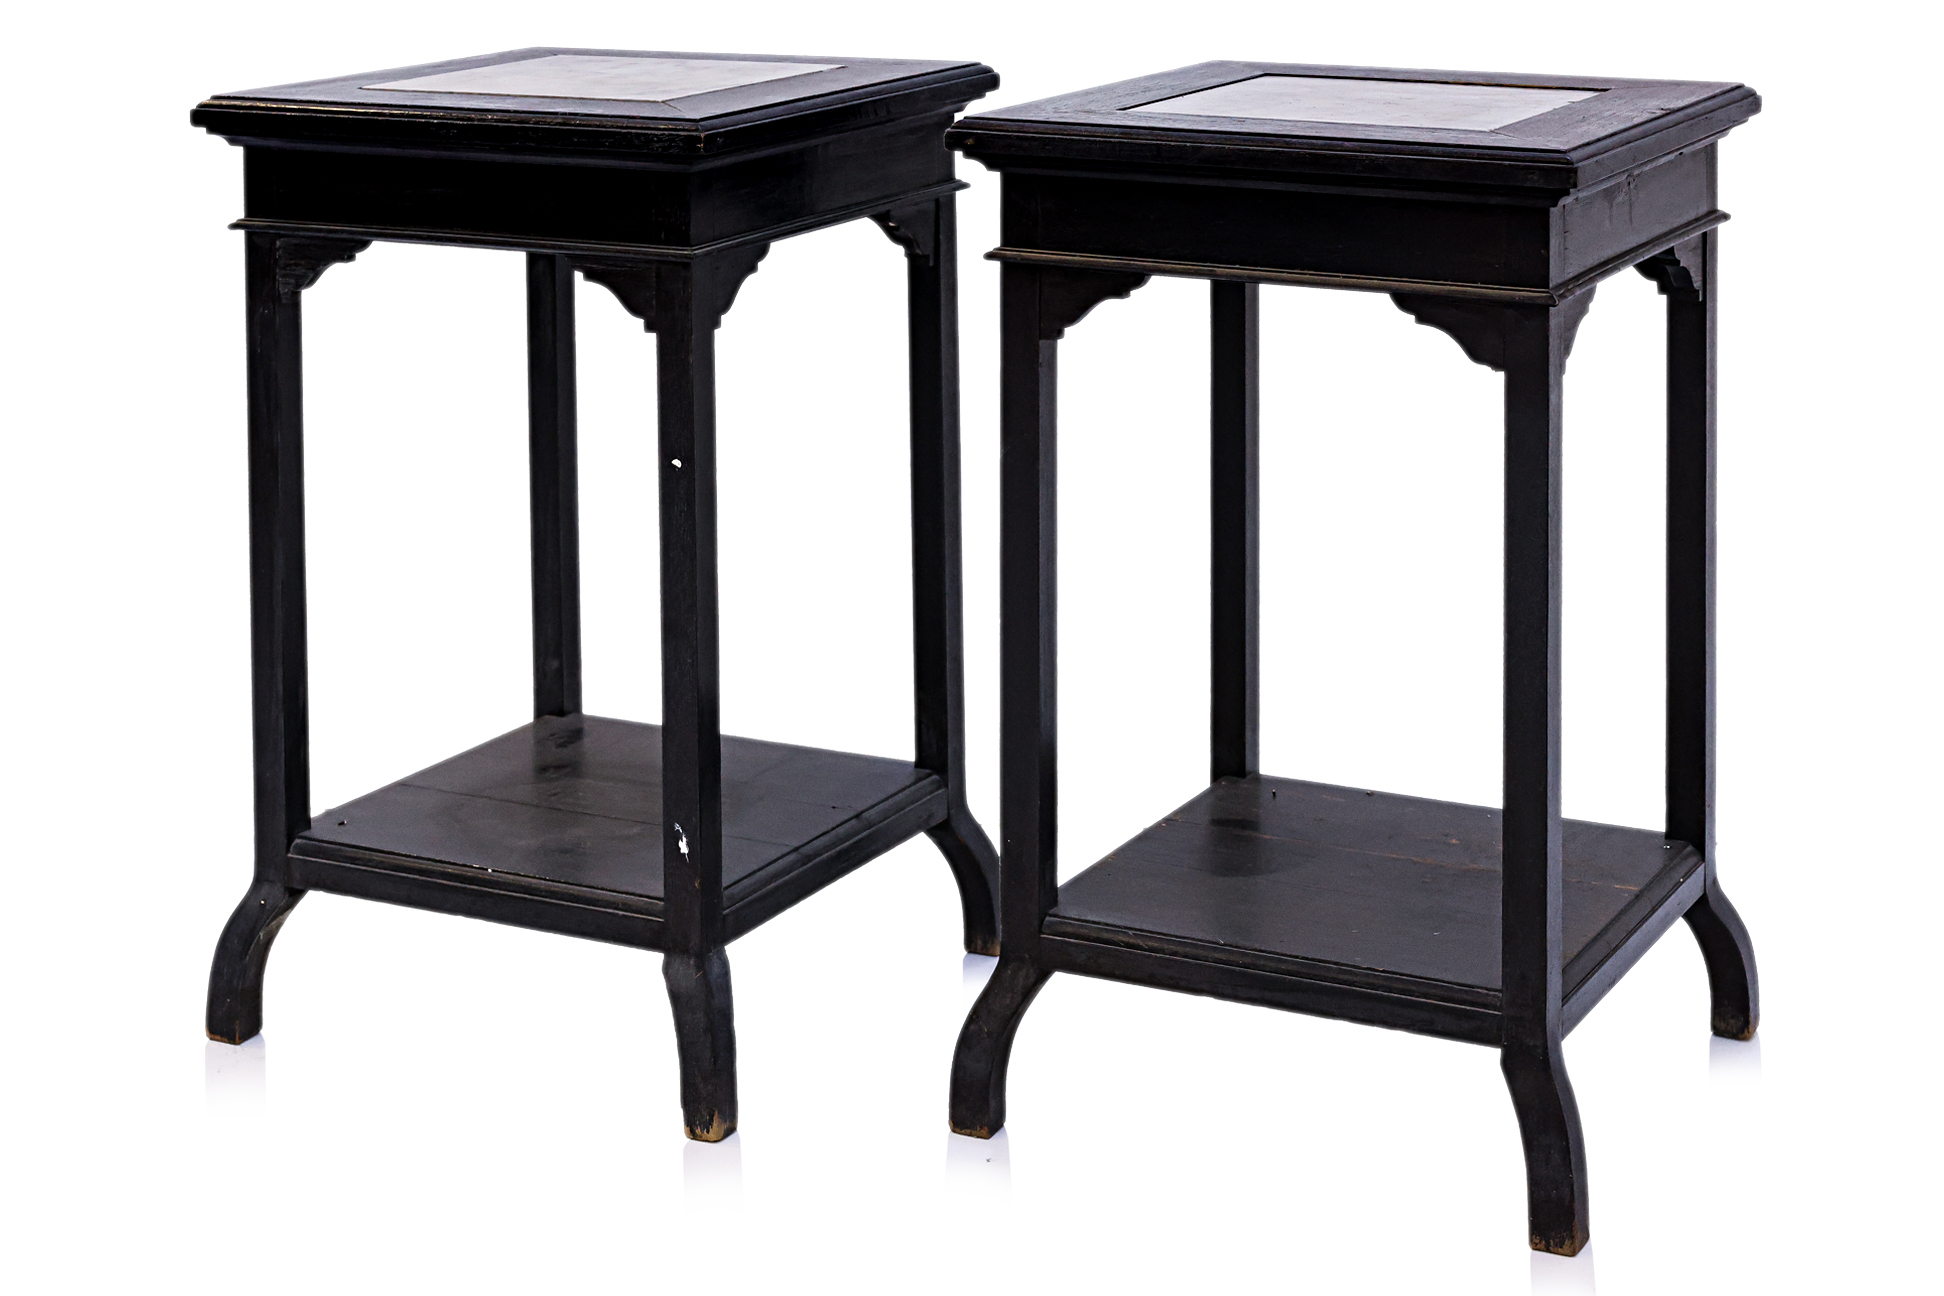 A PAIR OF MARBLE INSET HARDWOOD SIDE TABLES